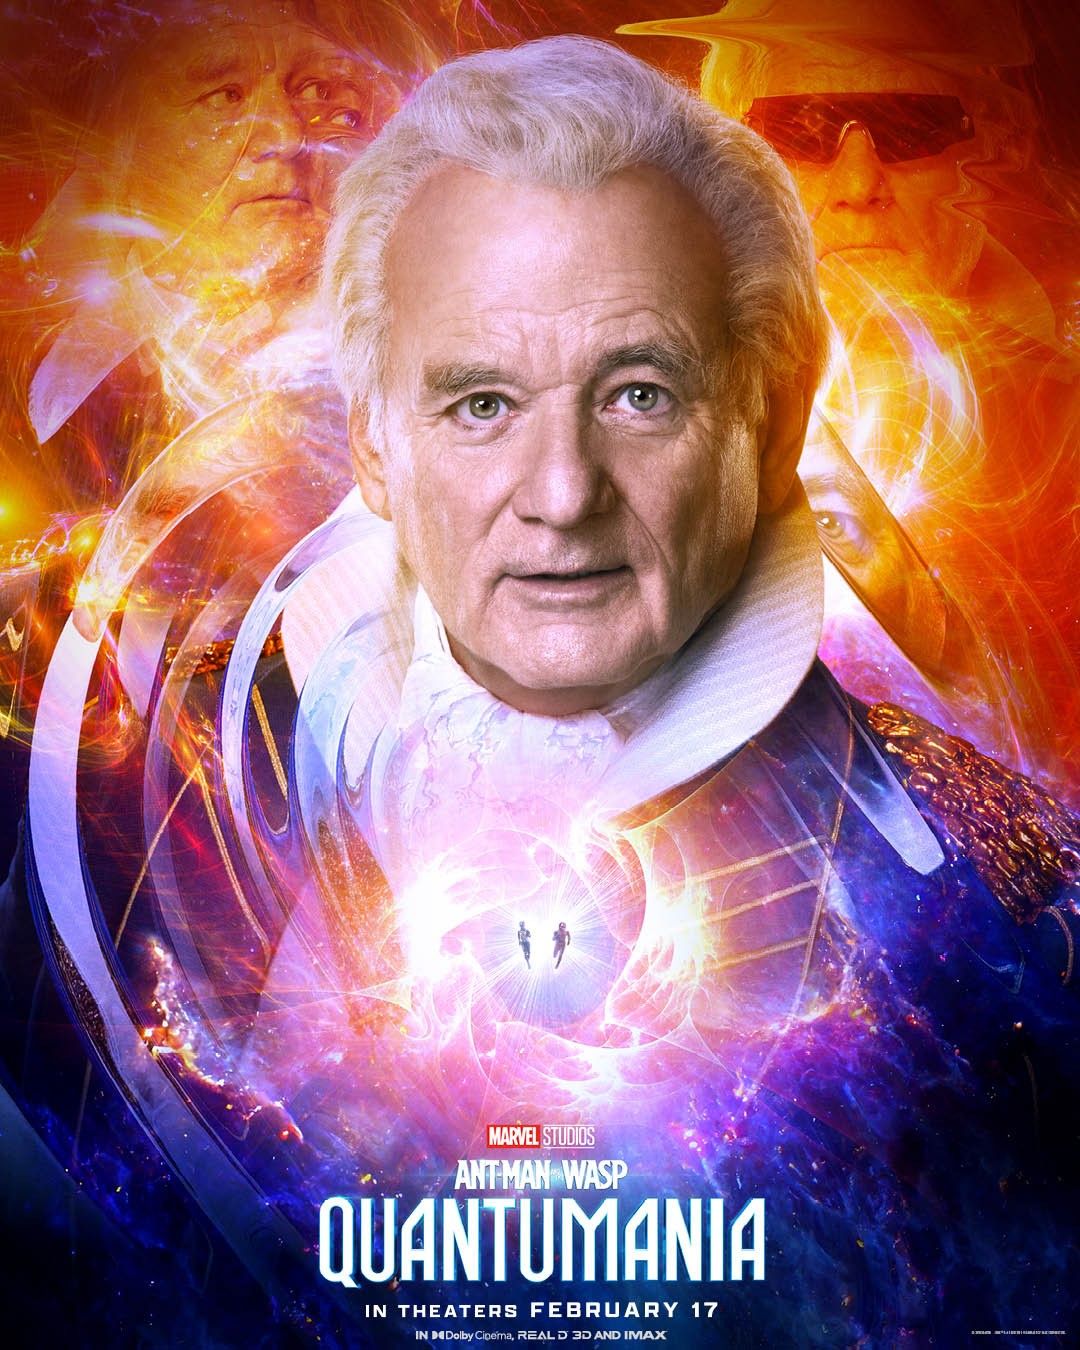 Bill Murray as Lord Krylar on his own Ant-Man and the Wasp Quantumania poster